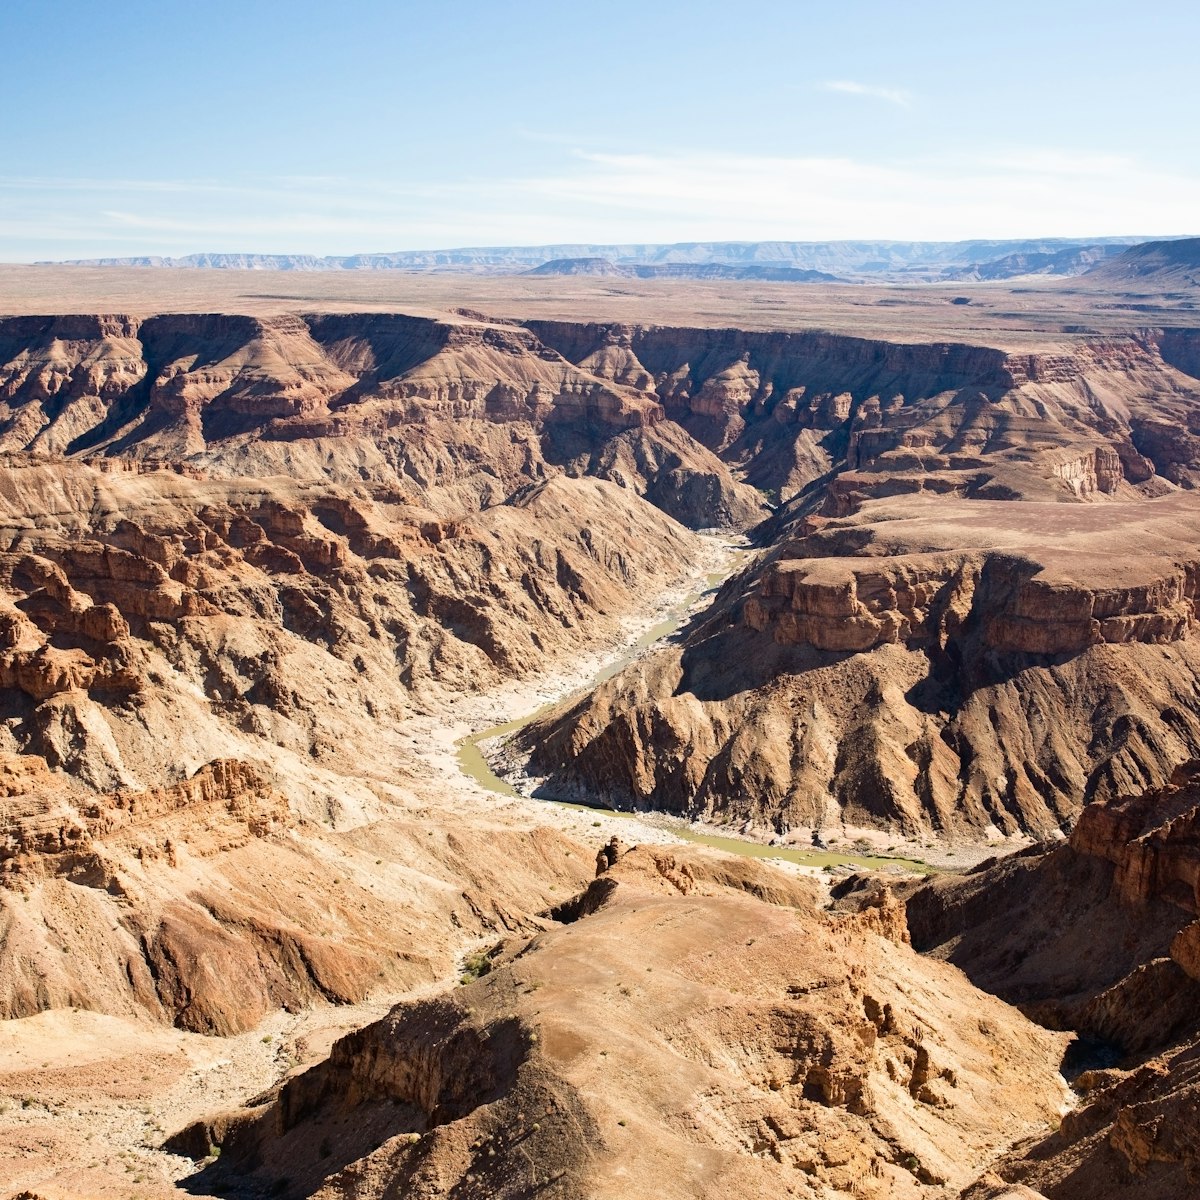 146817441
Africa; Barren; Drought; Dry; Extreme Terrain; Landscape; Outdoors; Weather; Arid Climate; Deep; Desert; Horizontal; Nature; No People; Remote; Scenics; Travel Destinations; Canyon; Fish River Canyon; Majestic; Photography; Namibia; Ravine;
Fish River Canyon in Namibia, the second largest canyon in the world